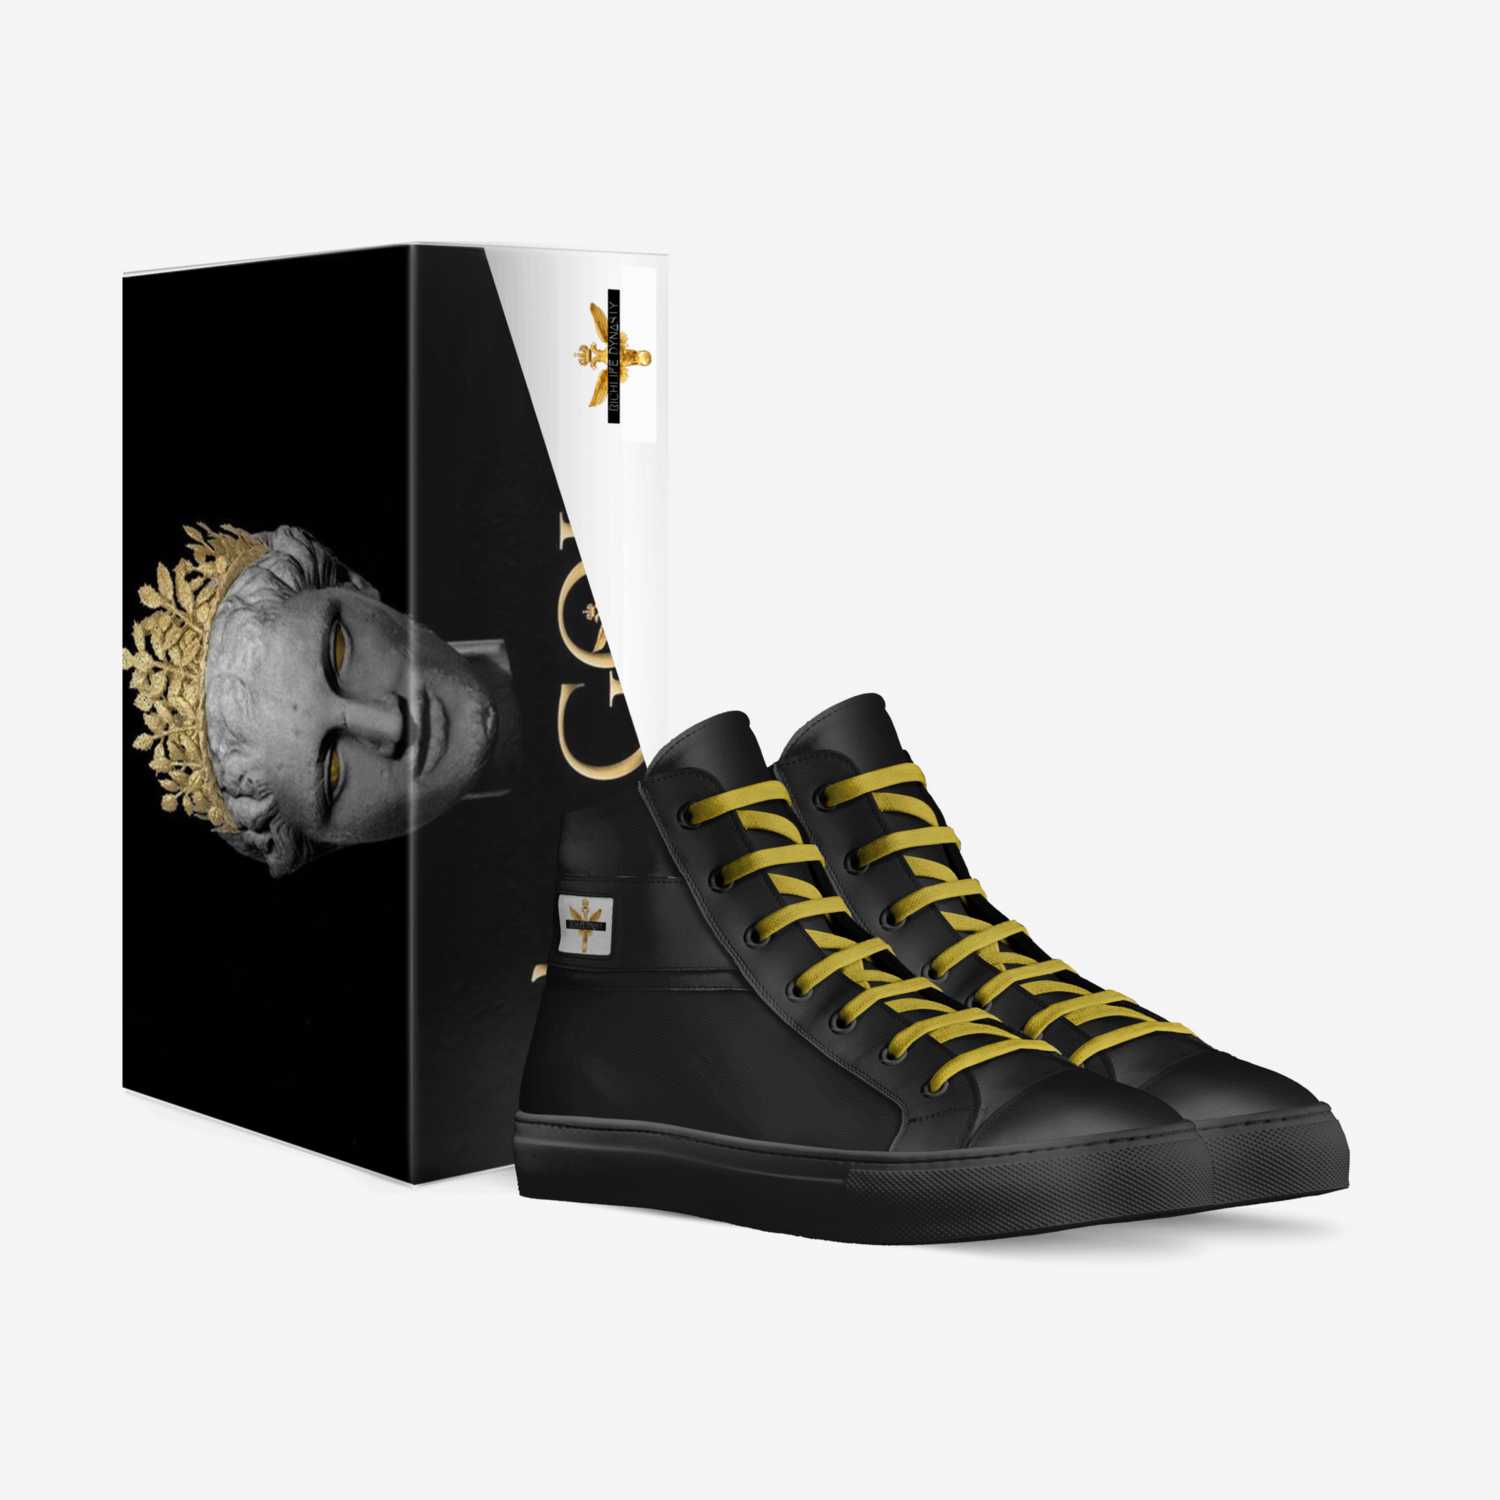 Trap Jesus custom made in Italy shoes by Dontay Jackson | Box view